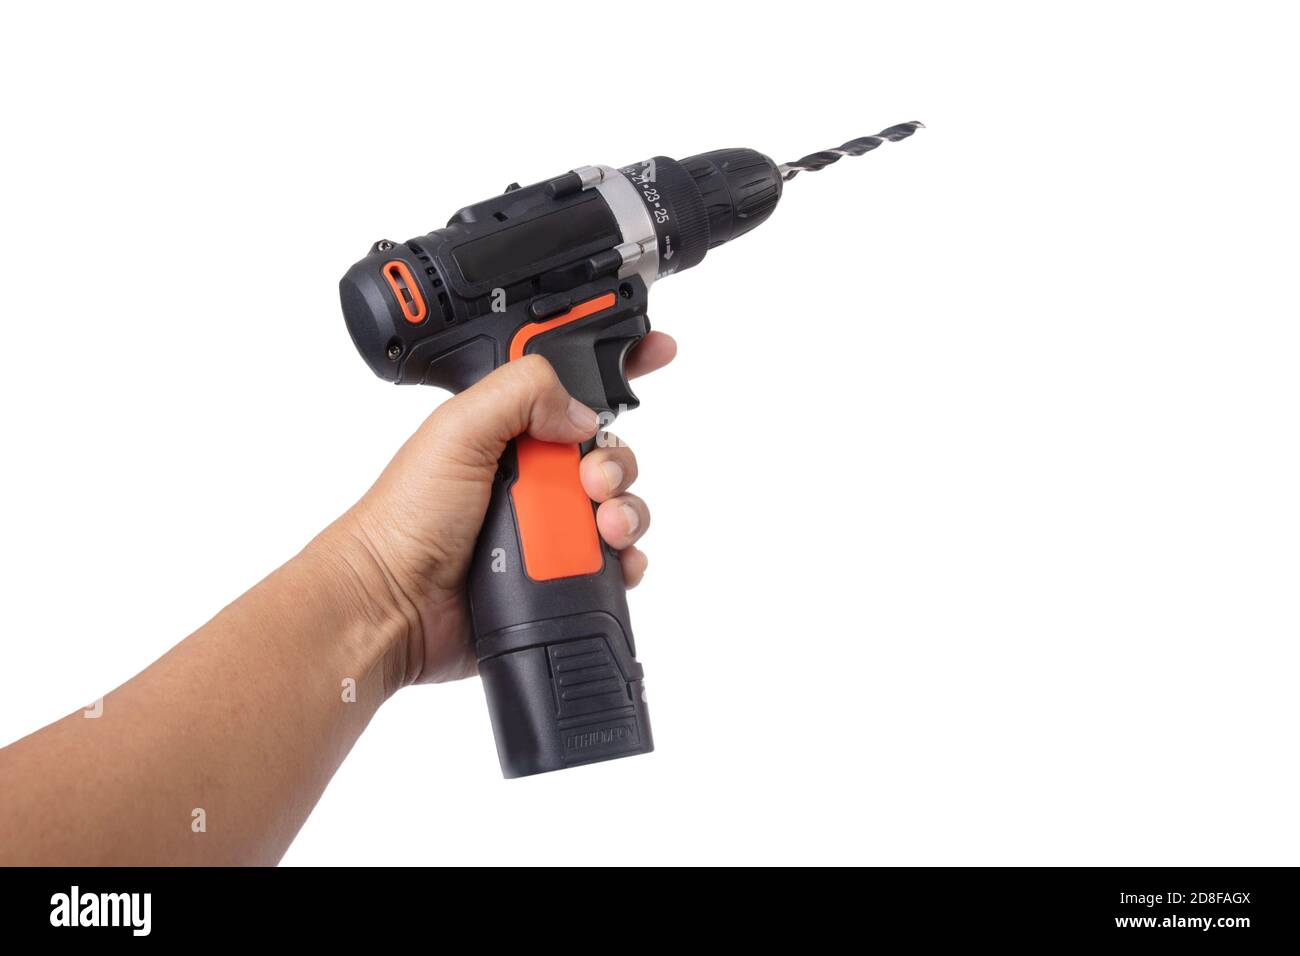 https://c8.alamy.com/comp/2D8FAGX/hand-holding-handheld-electric-drill-for-wood-work-on-white-background-2D8FAGX.jpg